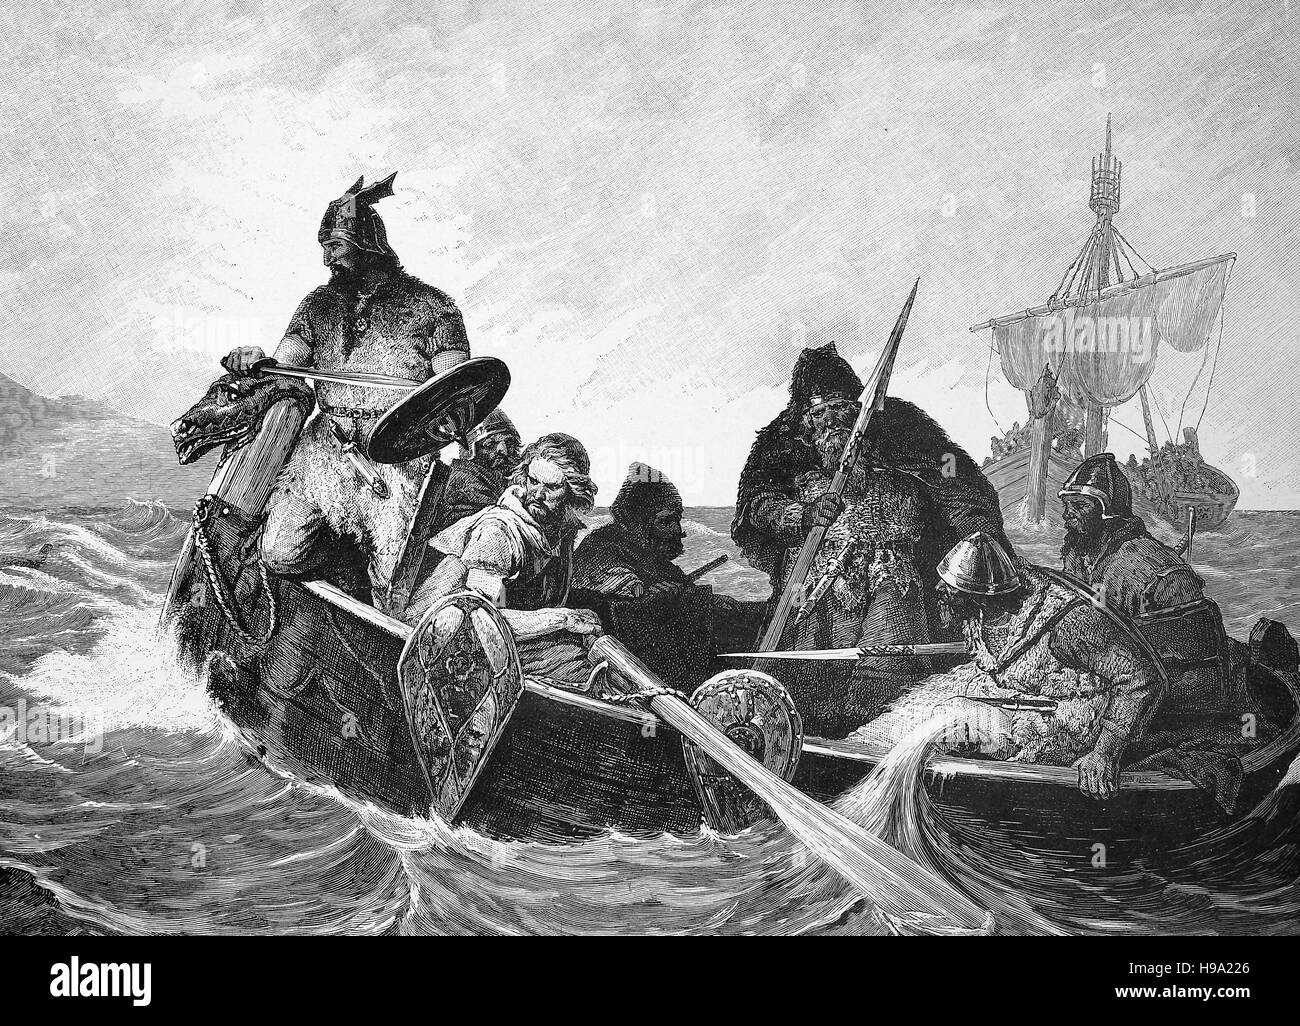 Normans with a boat, historical illustration Stock Photo